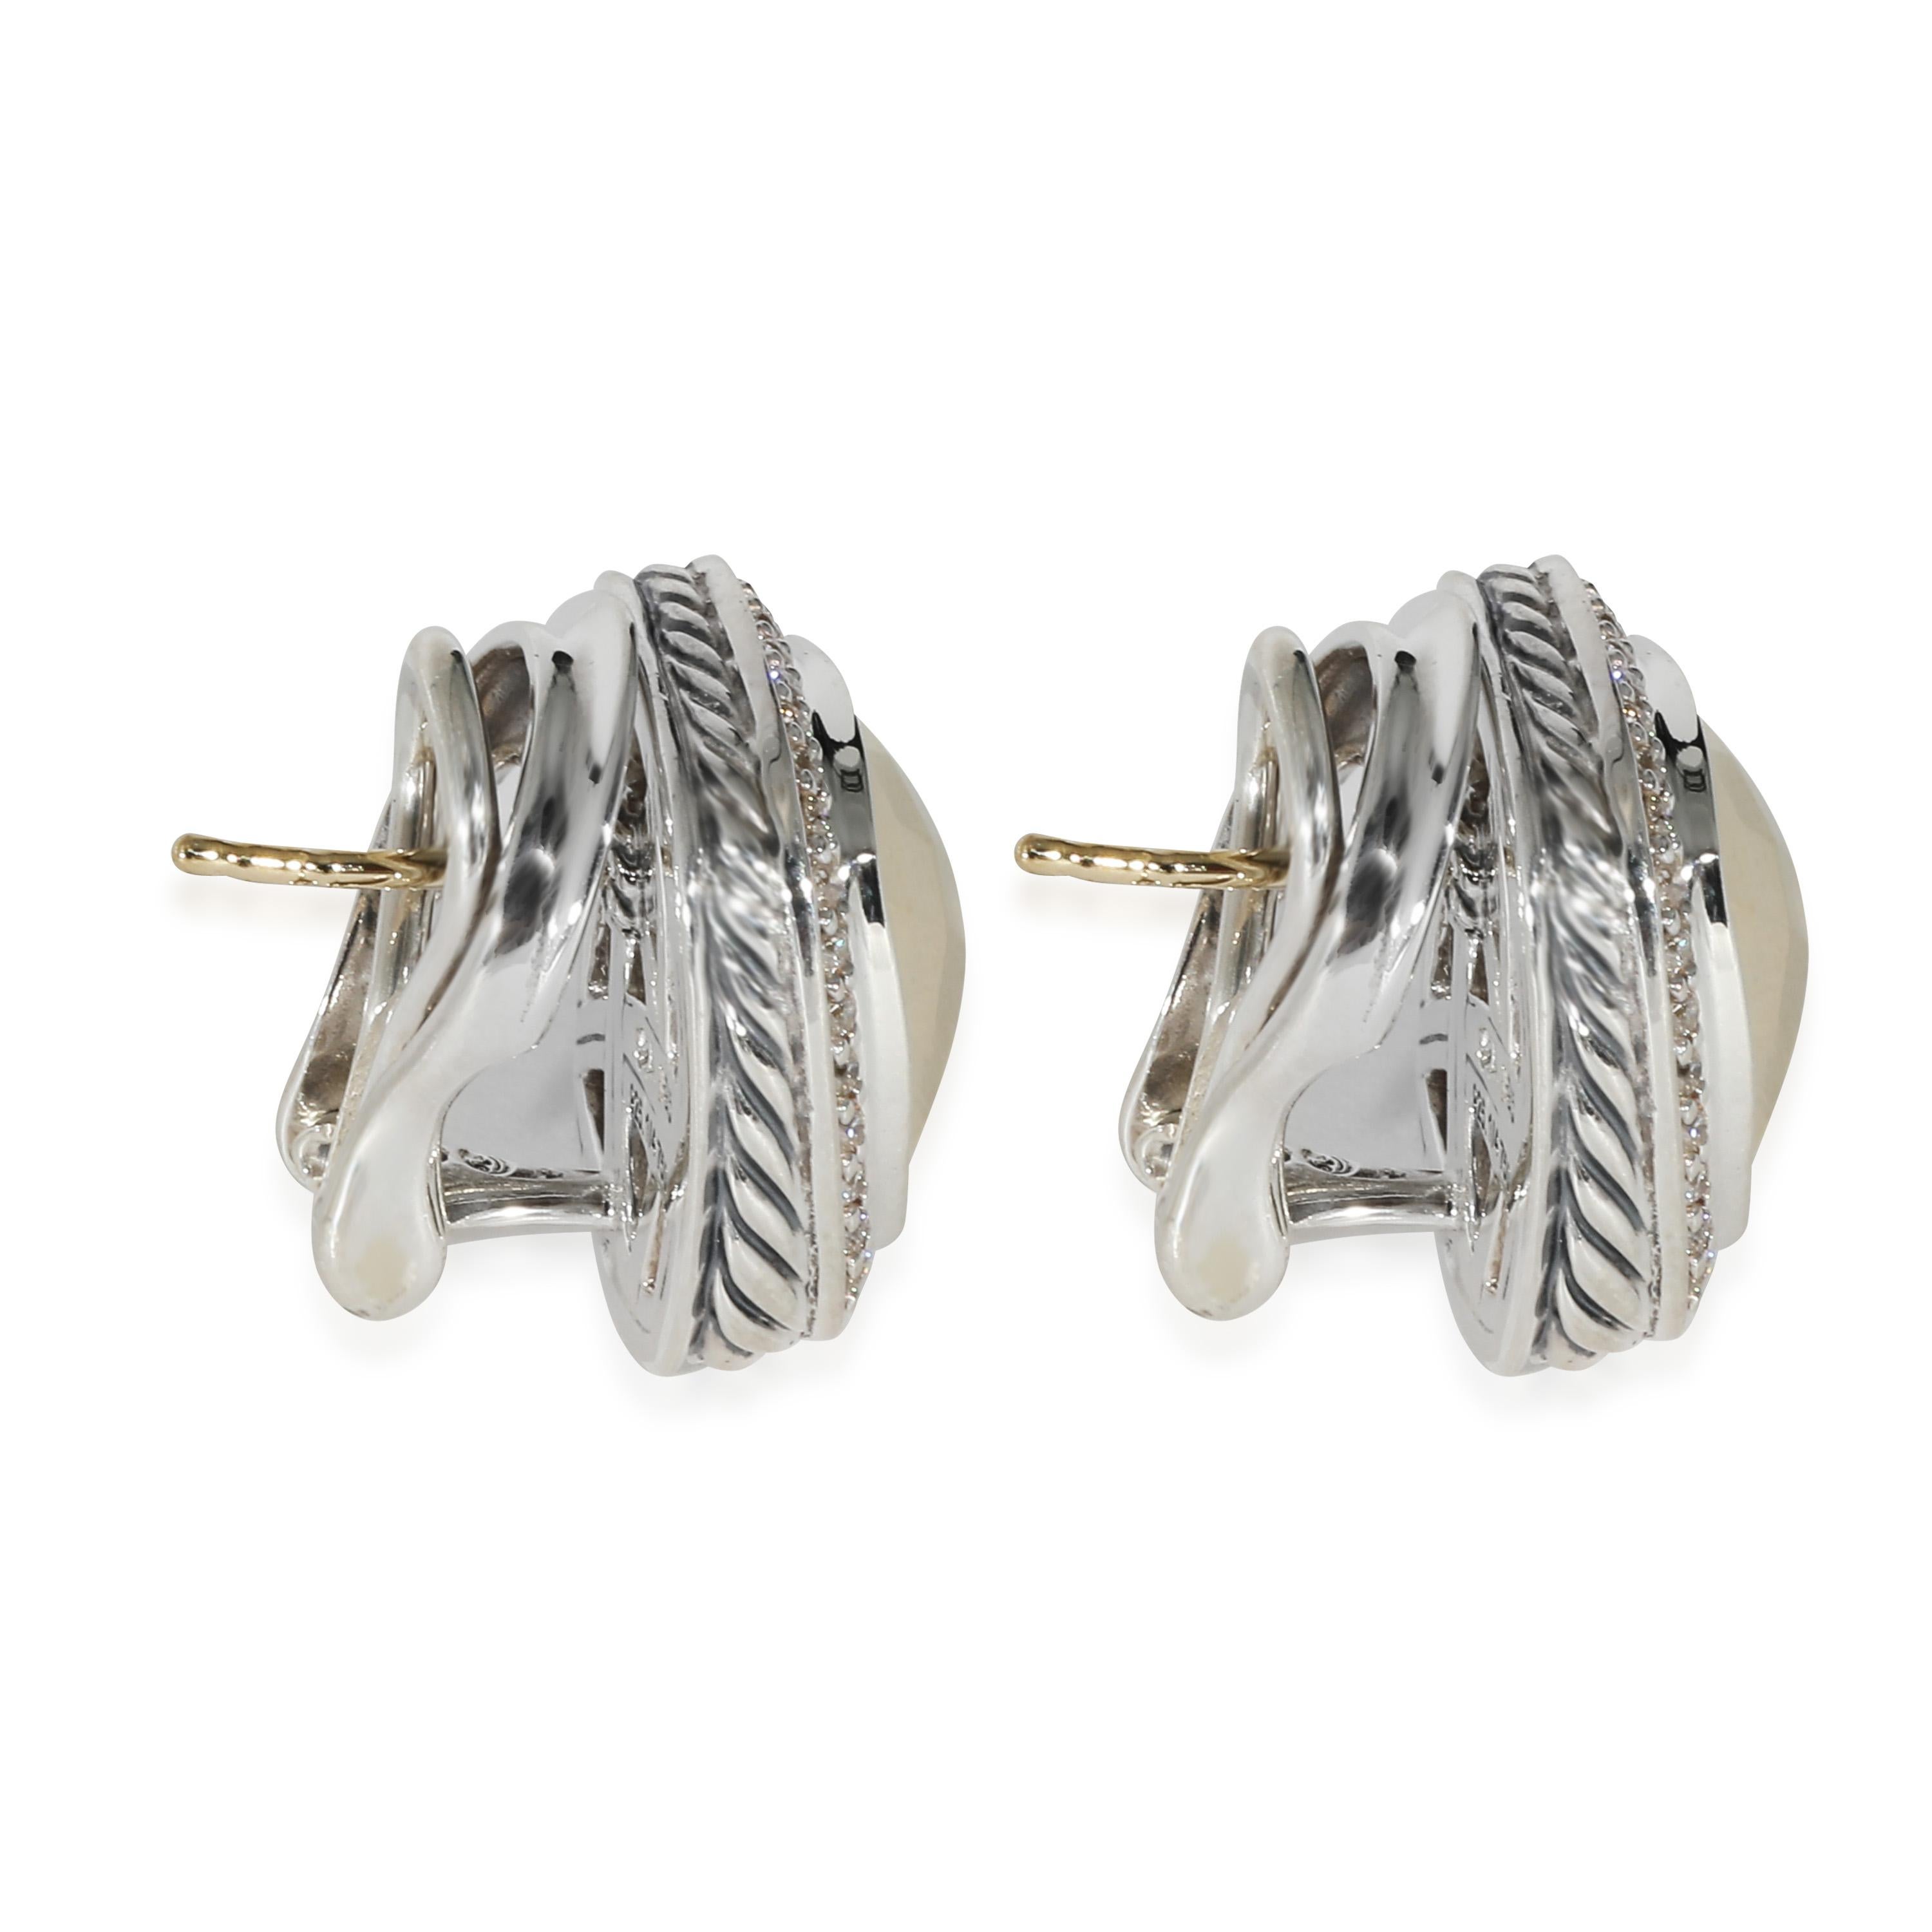 David Yurman Albion Diamond Earrings in 18K Yellow Gold/Sterling Silver 0.5 CTW

PRIMARY DETAILS
SKU: 135101
Listing Title: David Yurman Albion Diamond Earrings in 18K Yellow Gold/Sterling Silver 0.5 CTW
Condition Description: Introduced in 1994 and